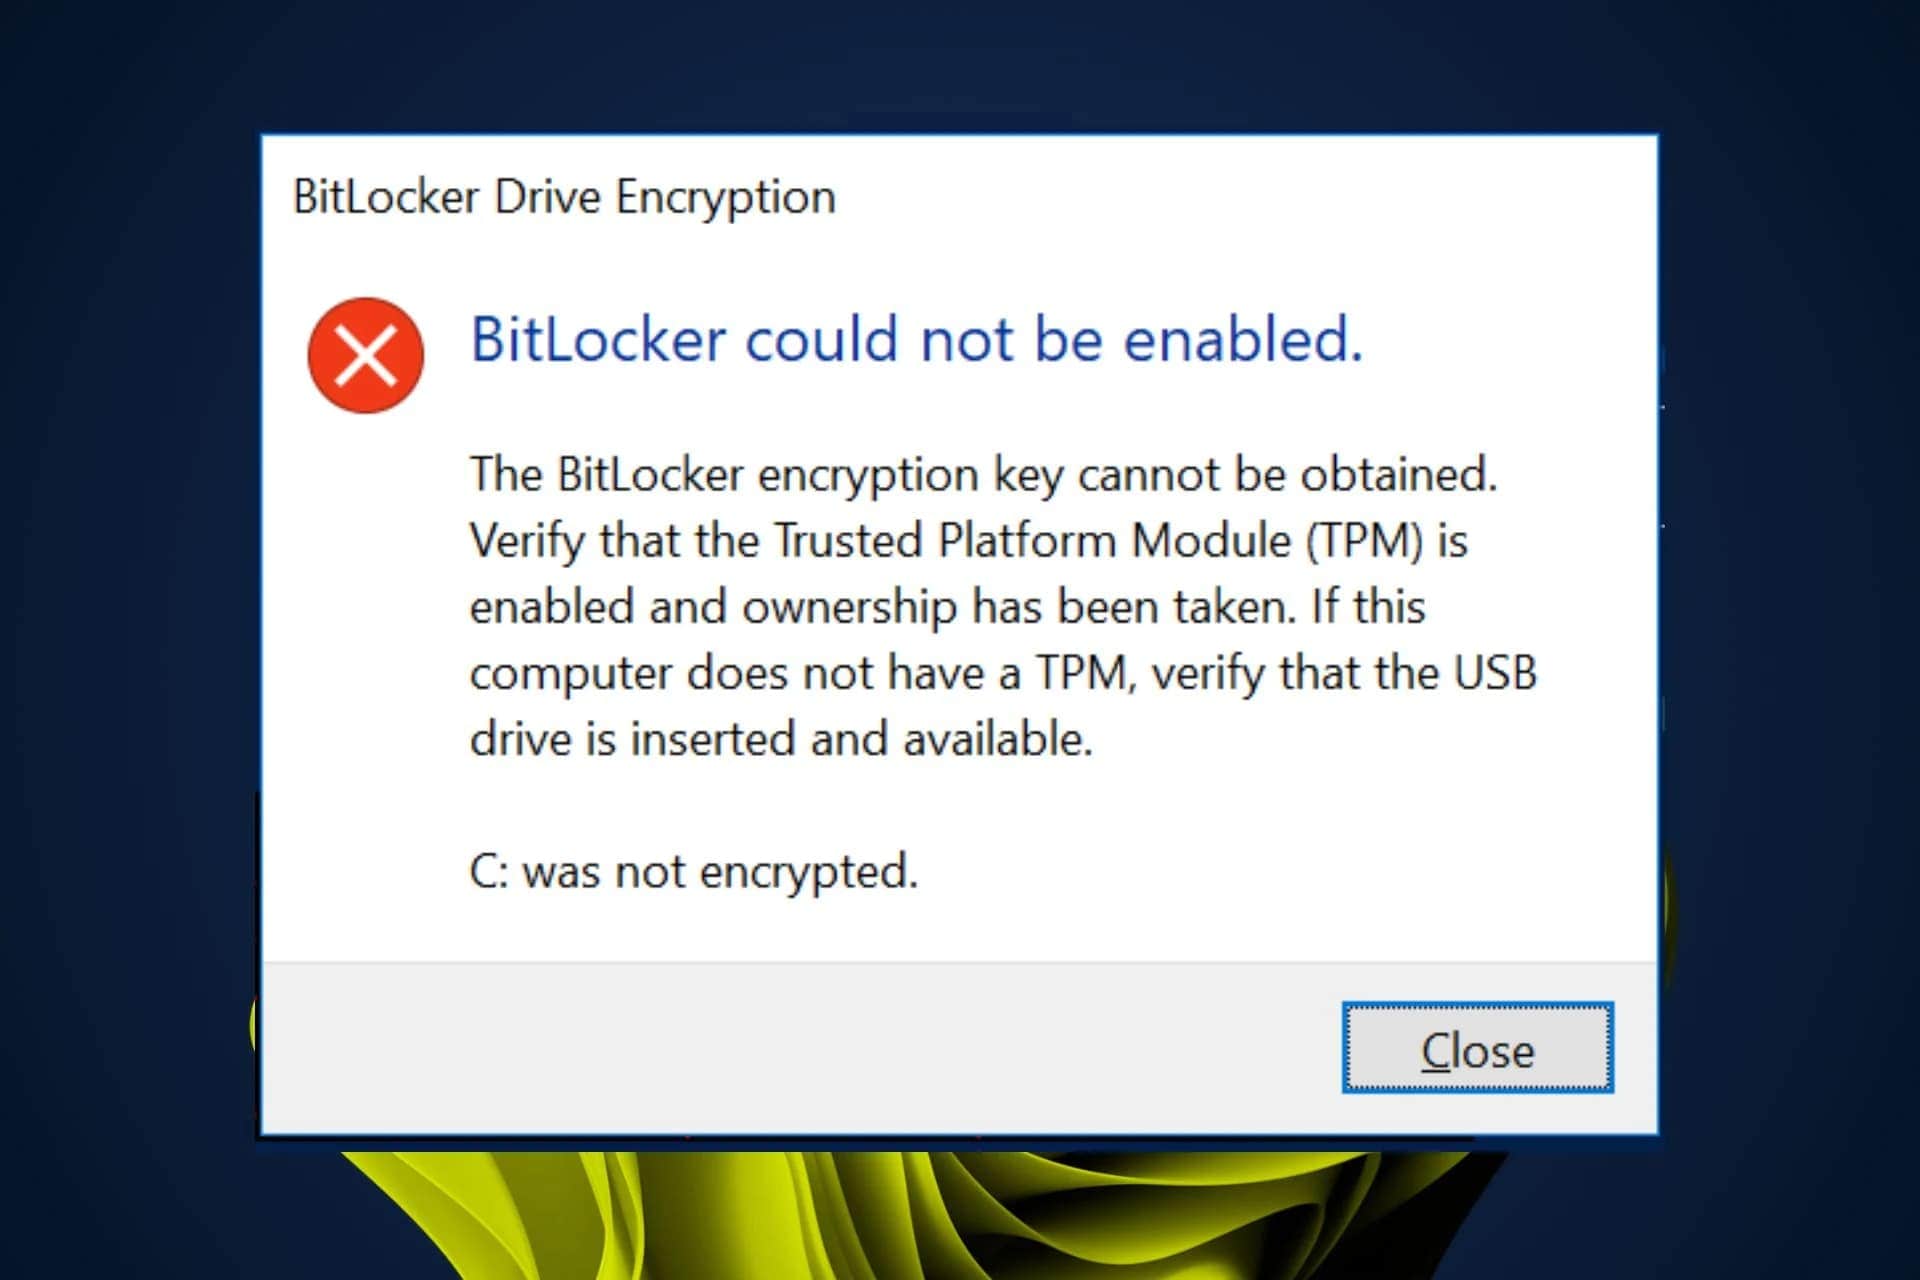 How to Fix “BitLocker Could Not Be Enabled” Error